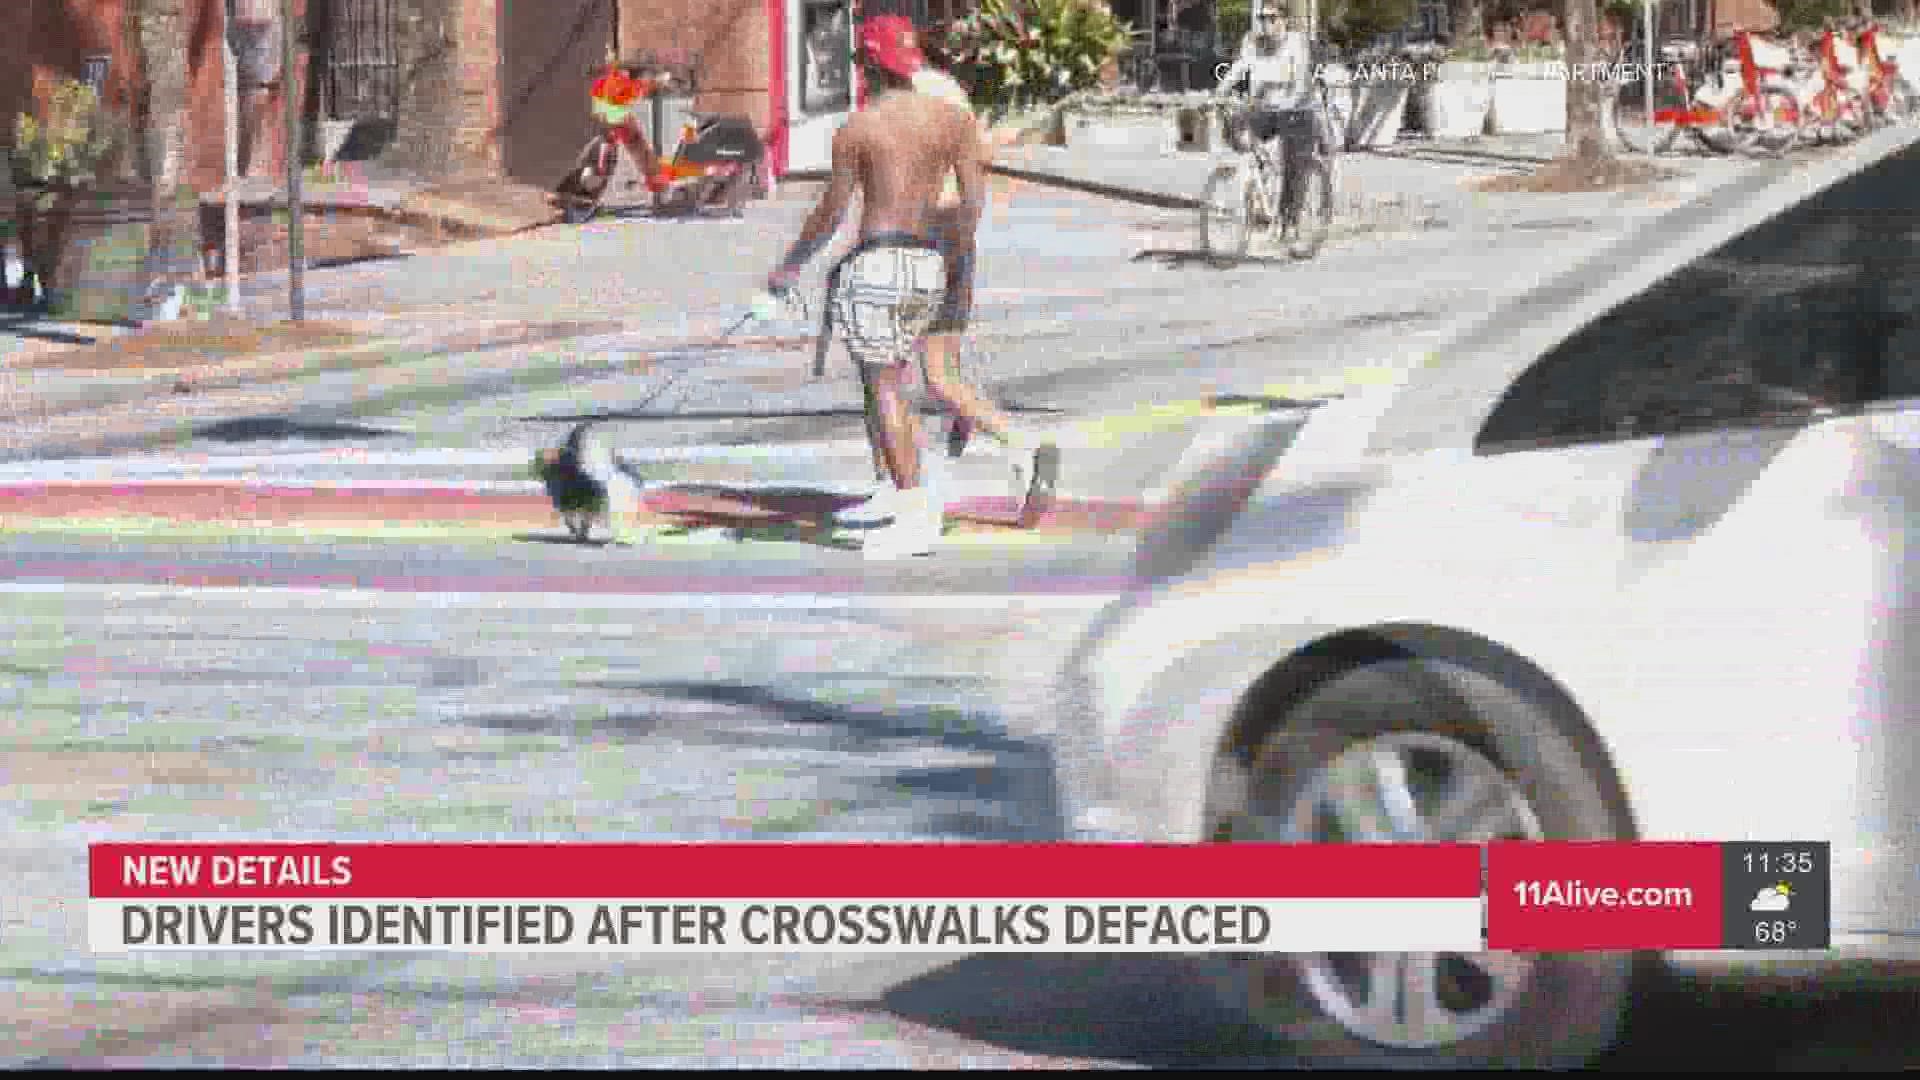 Atlanta police said most of the drivers were not from the city and are now working to get them back to face charges after damaging the iconic crosswalk.